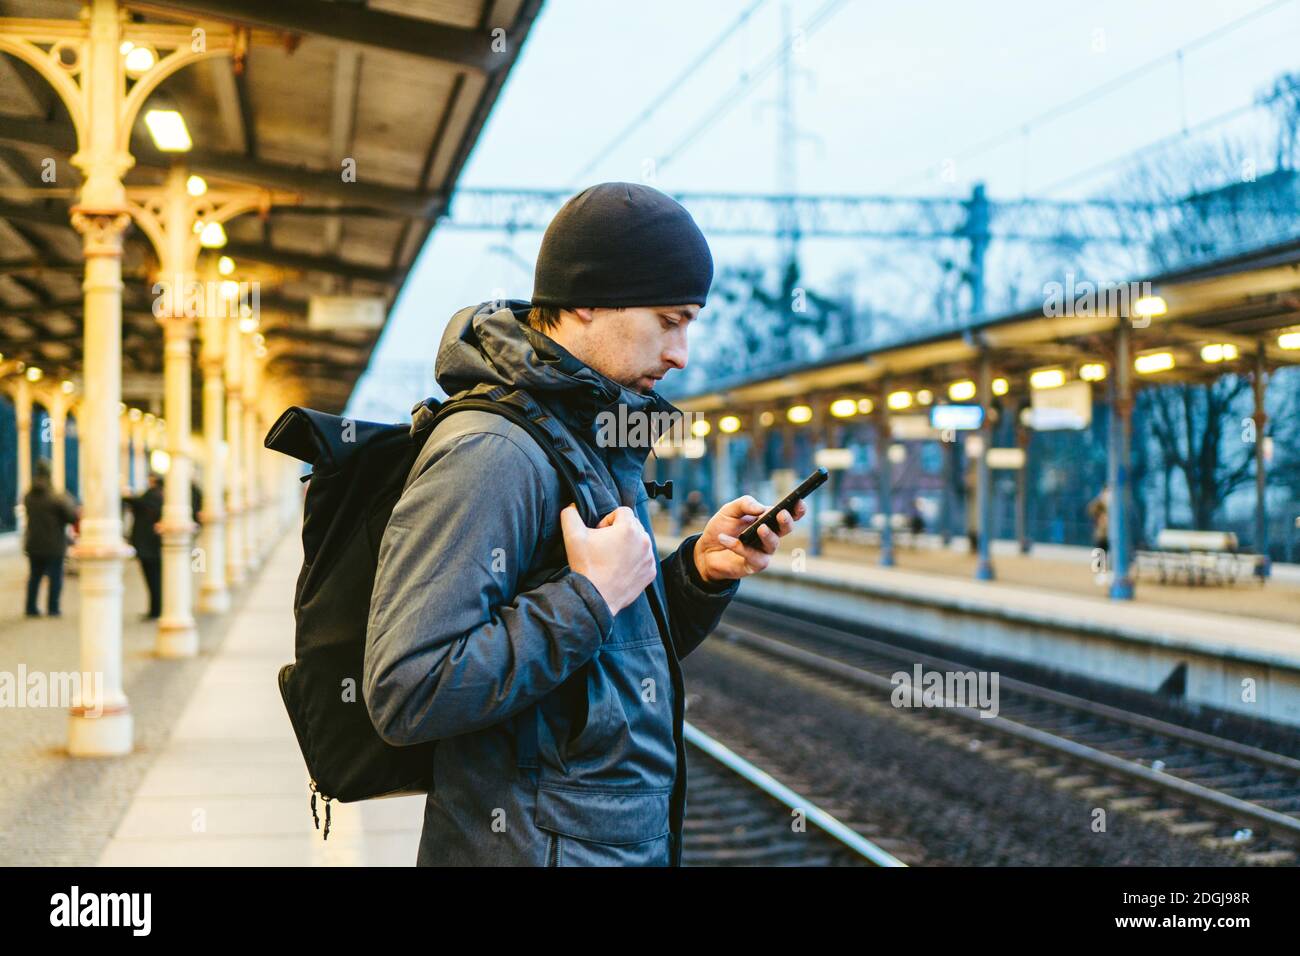 Sopot Fast Urban Railway station. young man standing and waiting train on platform. tourist travels by train. Portrait Of Caucas Stock Photo